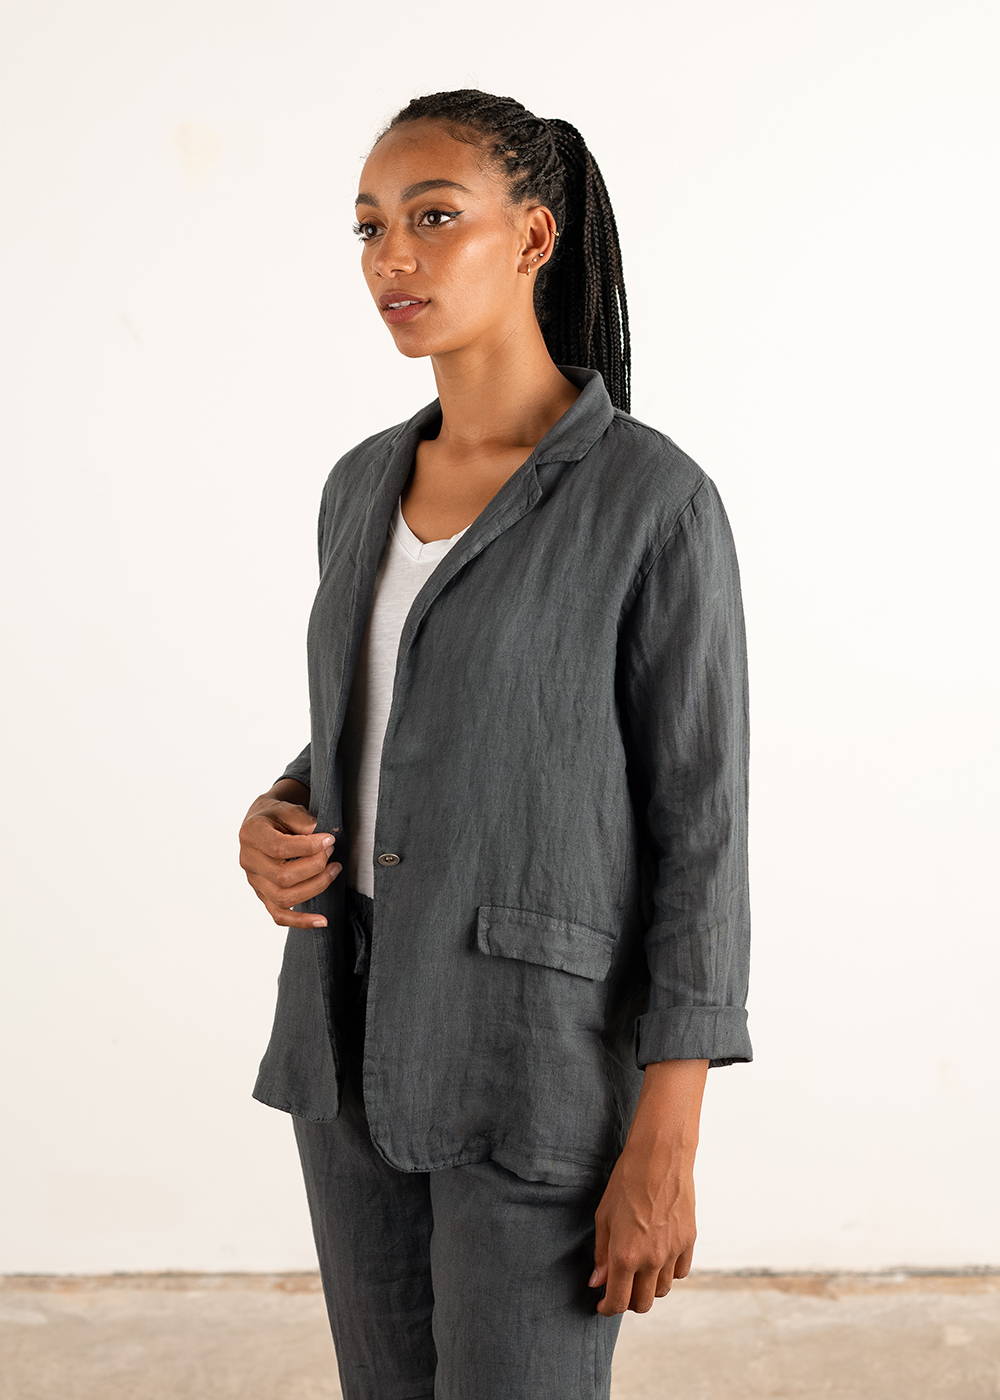 A model wearing a dark grey linen jacket over a white top  and matching trousers